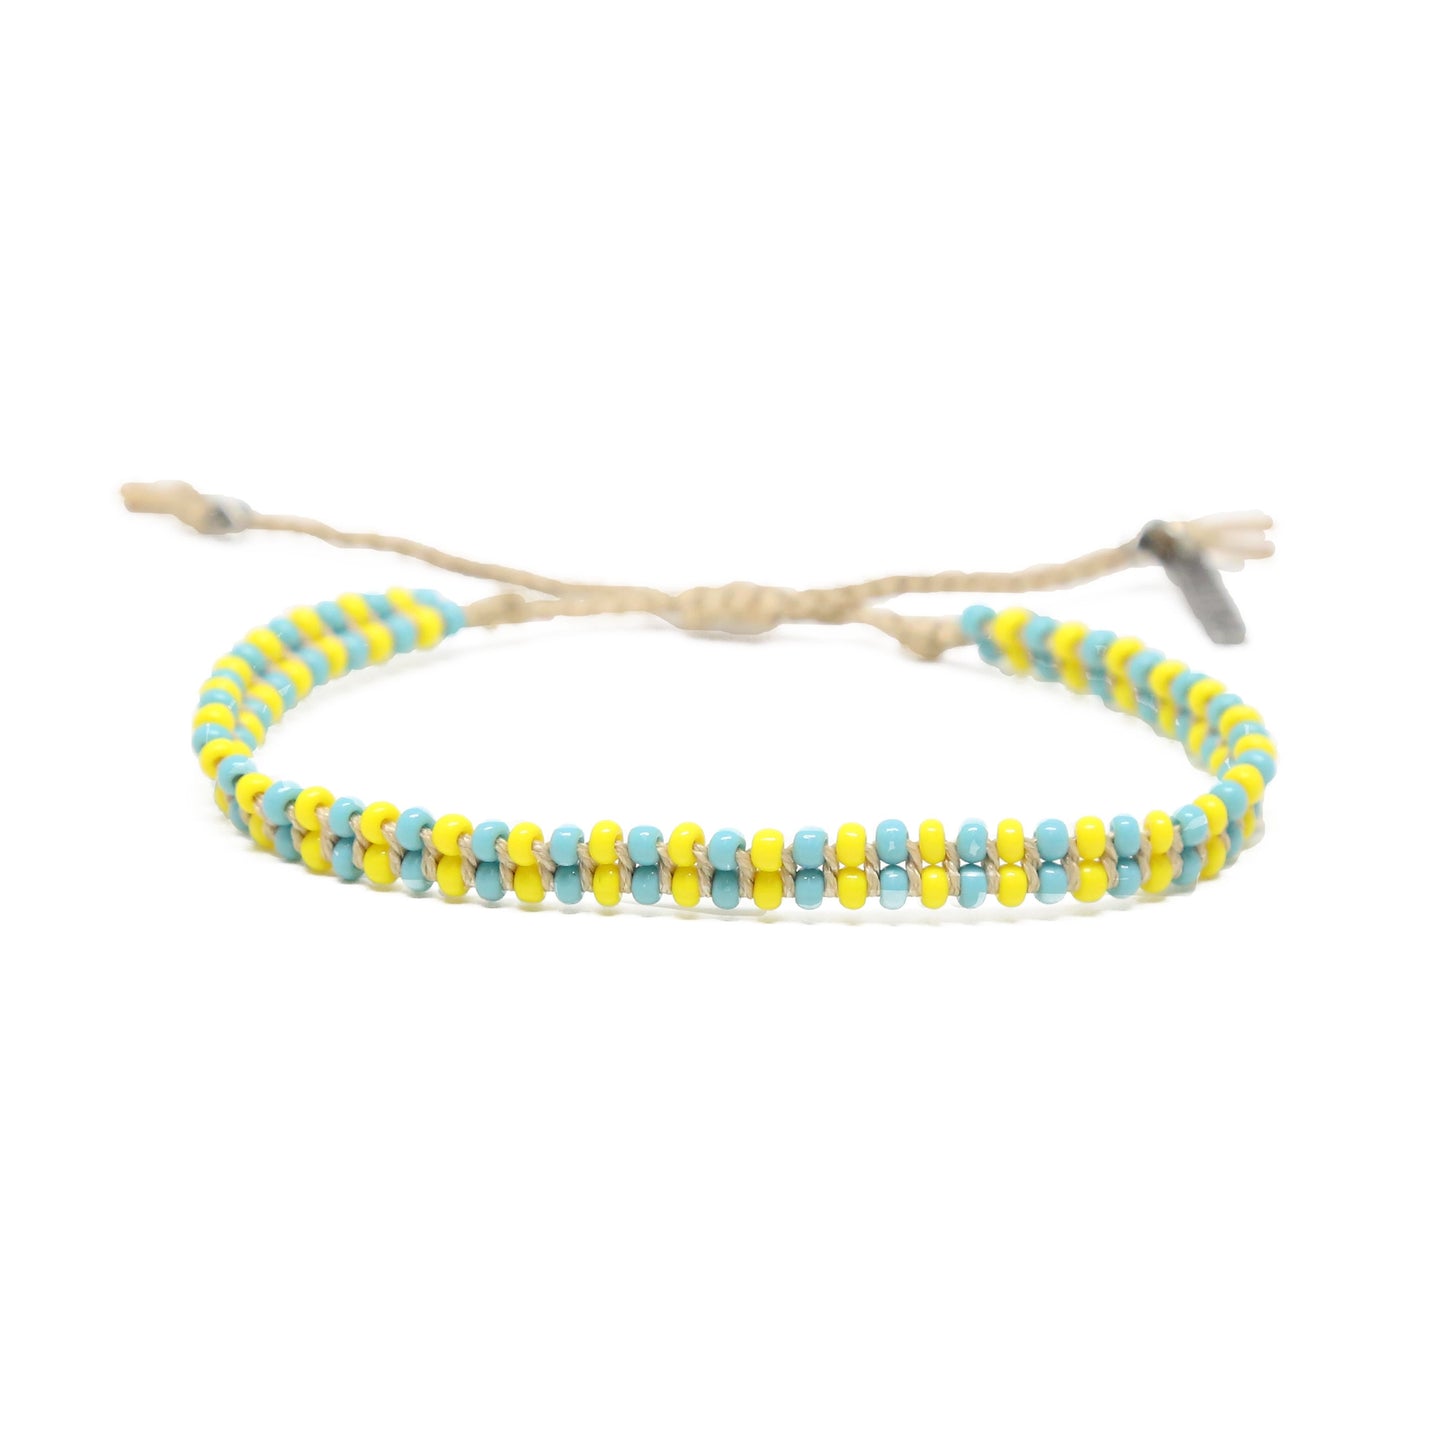 About Those Vibes Bracelet in Turquoise, Yellow, and Tan